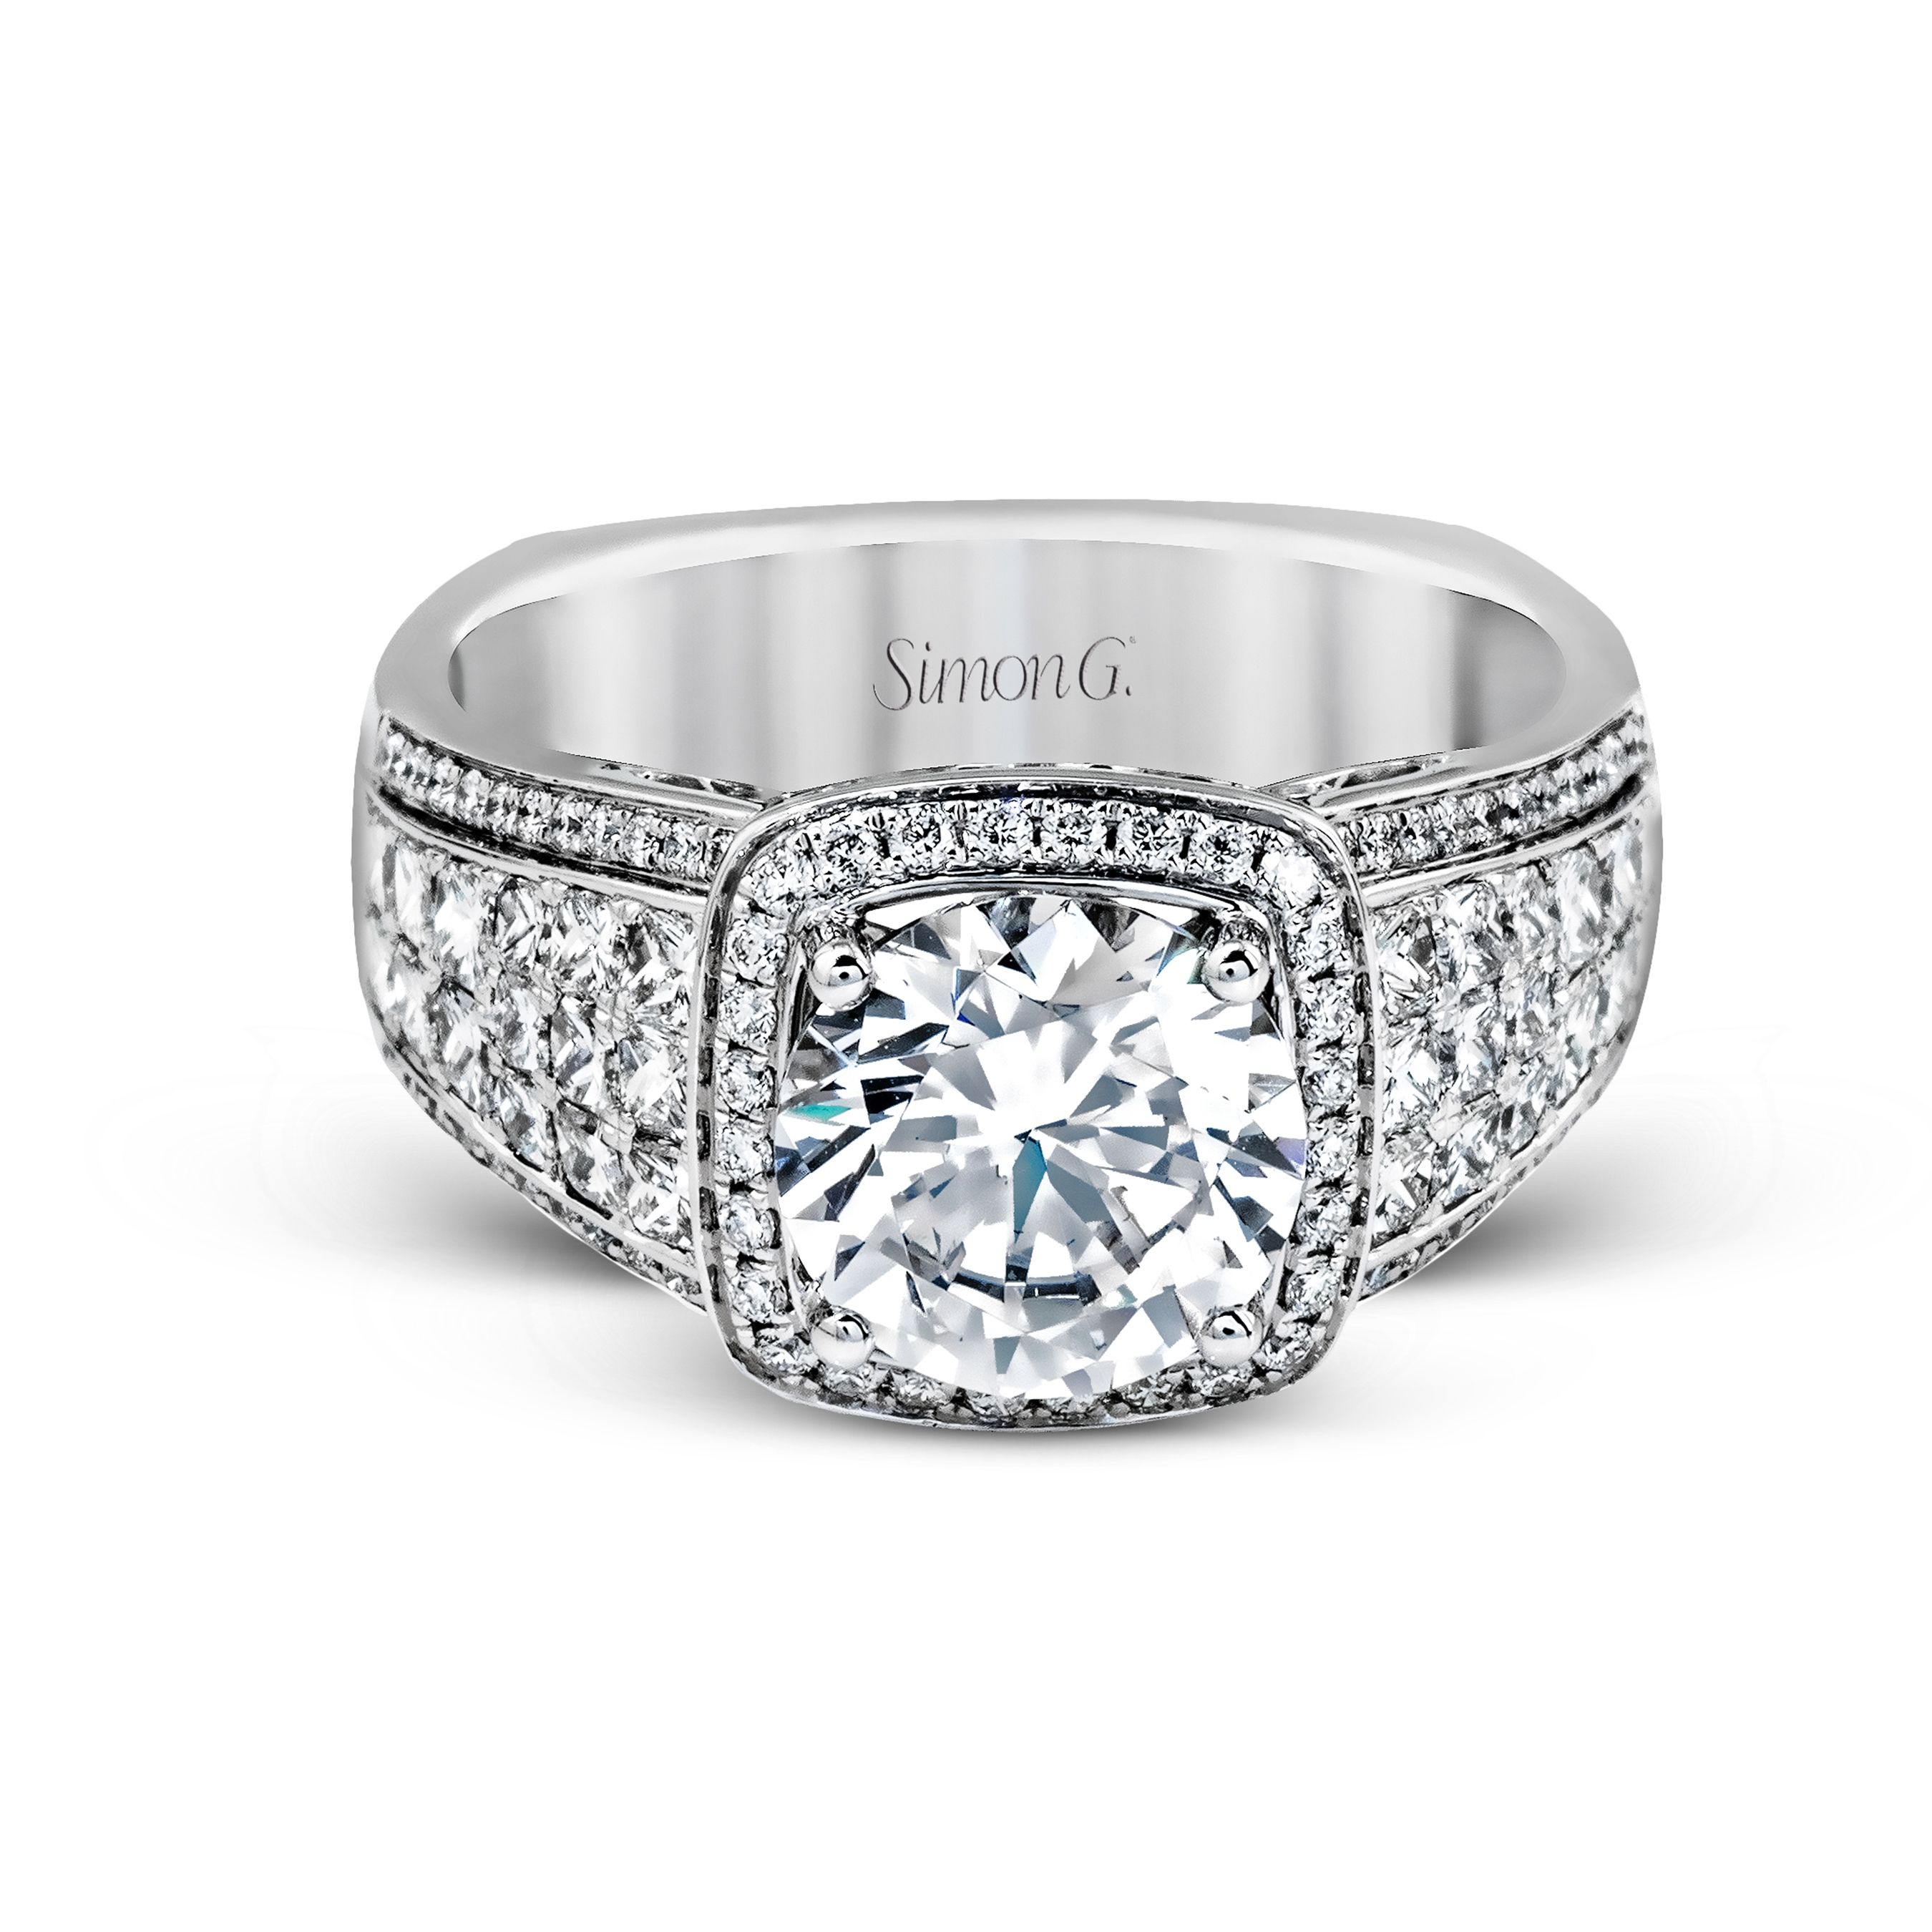 MR2515 Nocturnal Sophistication Collection White Gold Round Cut Engagement Ring